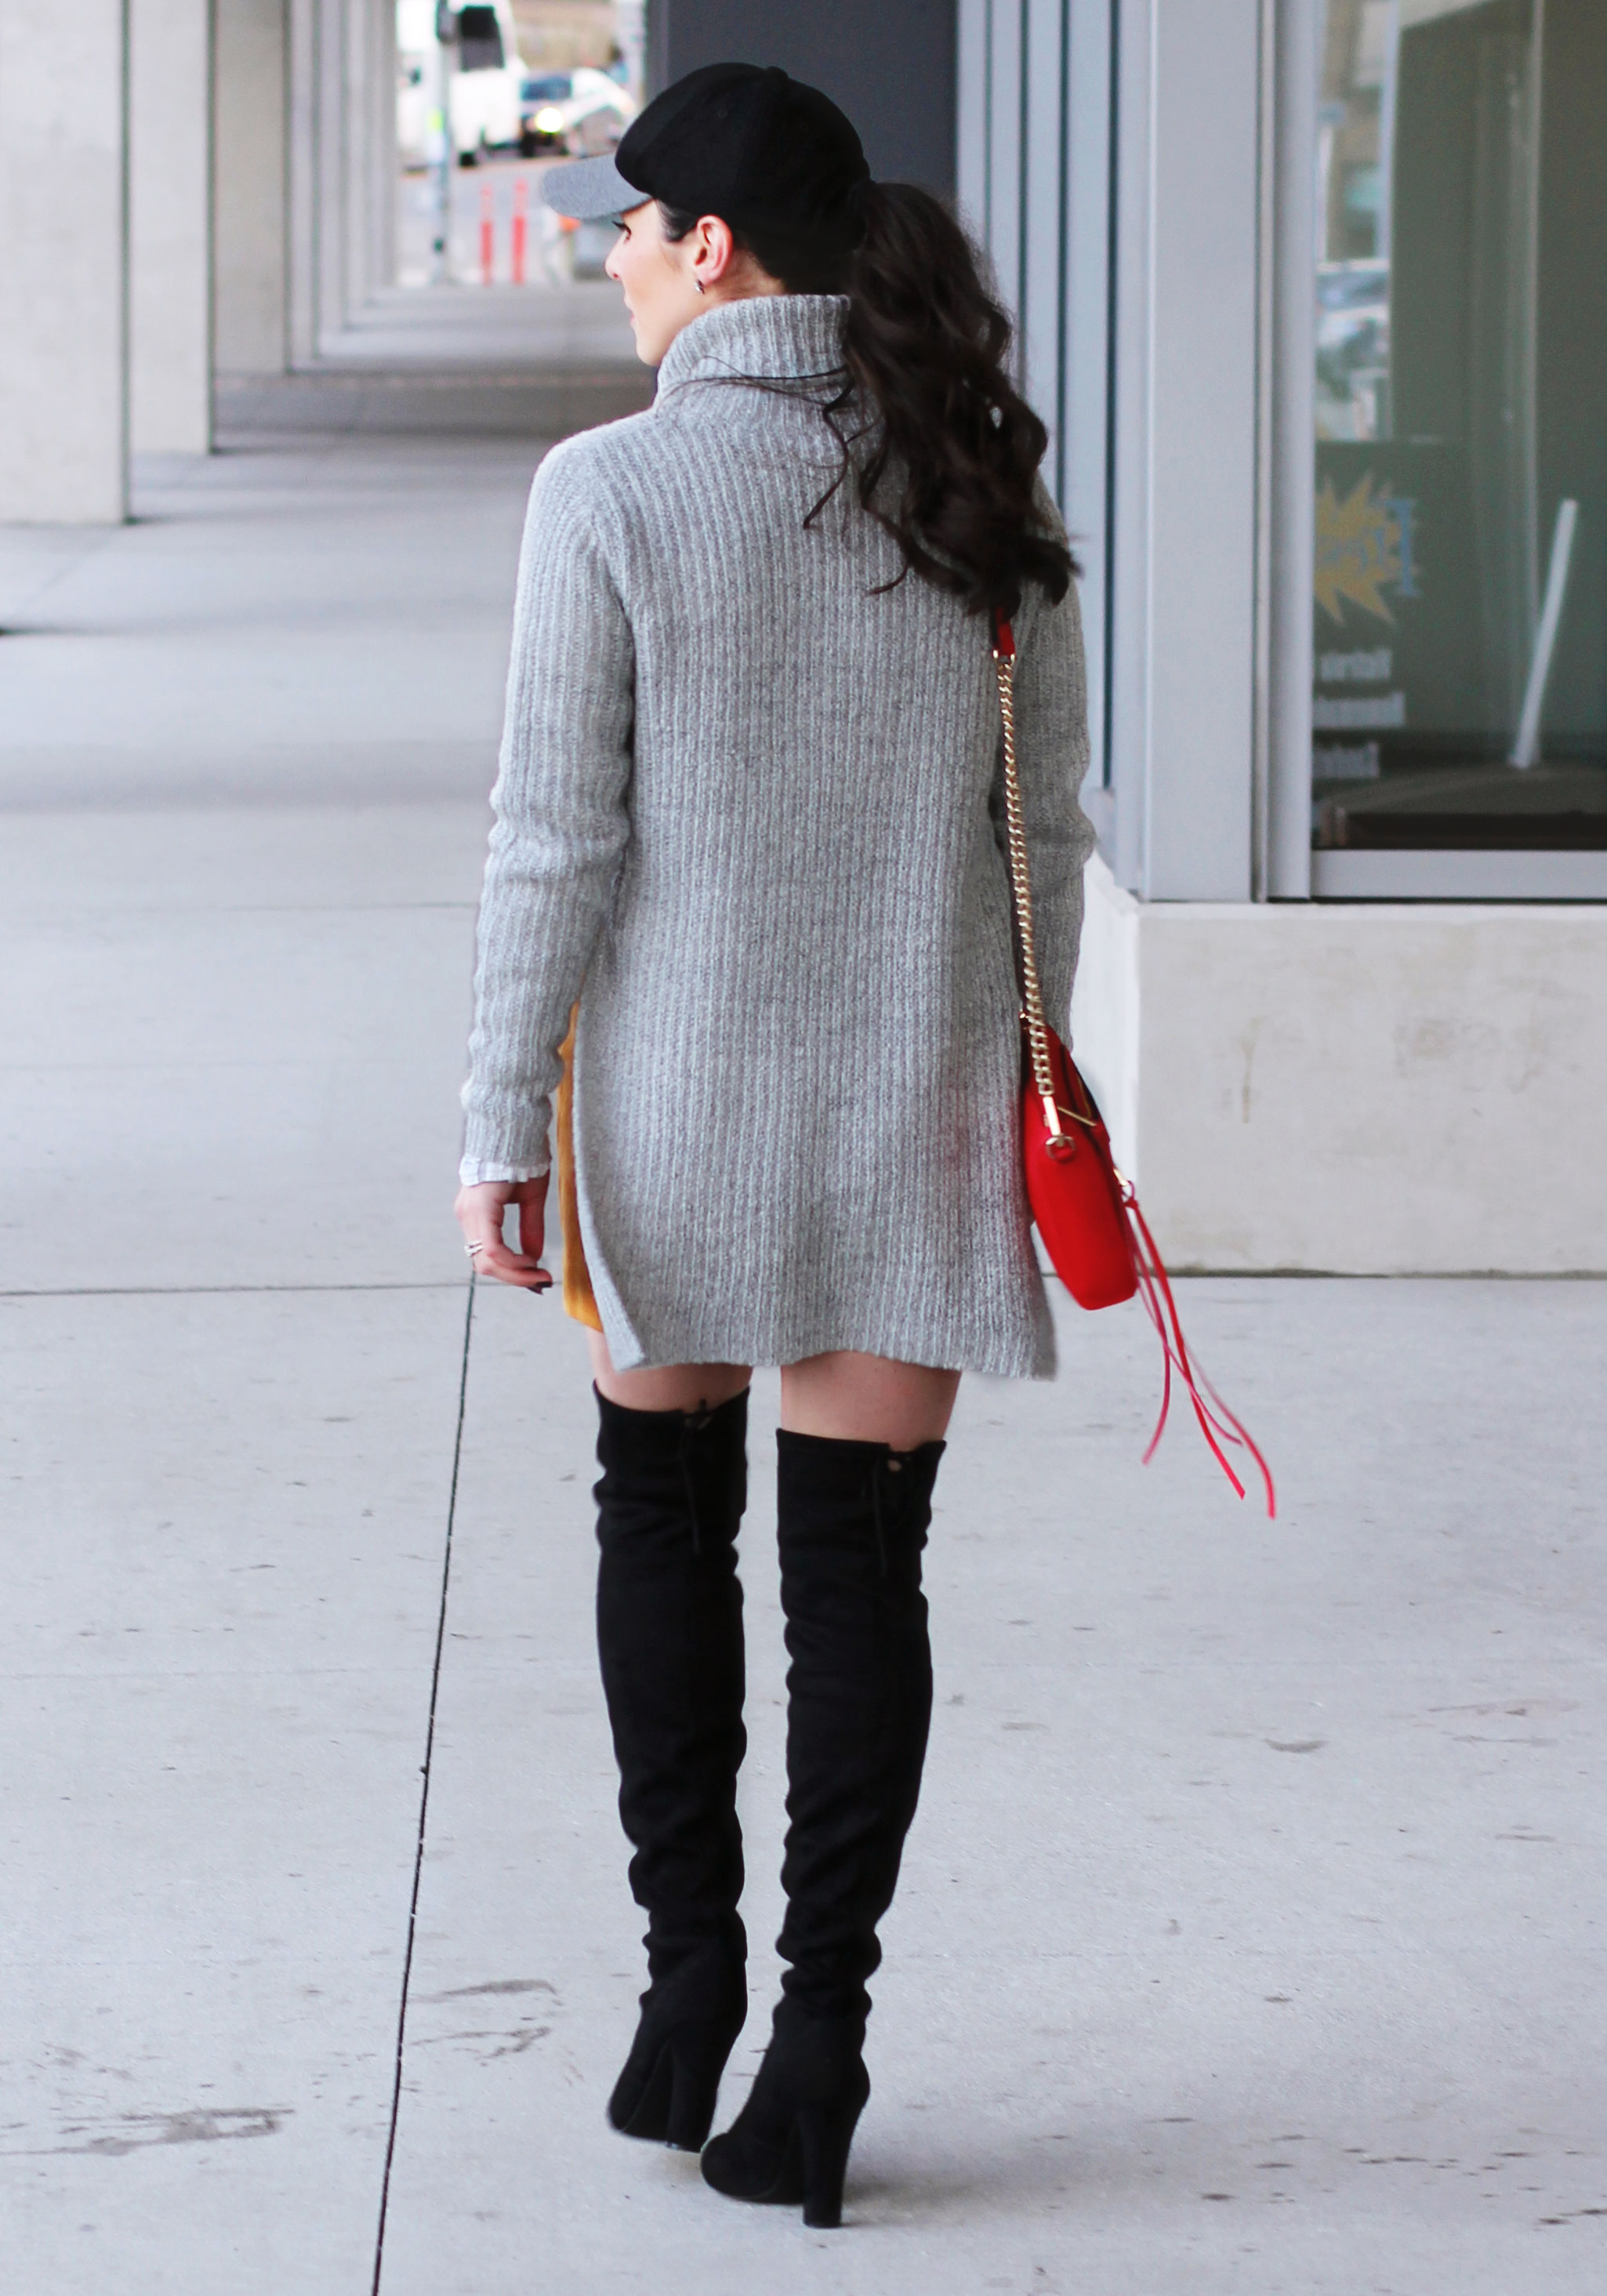 Winter Outfit, Sweater with Suede Skirt, Steve Madden Gorgeous Over The Knee Boots, Wool Baseball Hat, Red Rebecca Minkoff Avery Crossbody Bag 